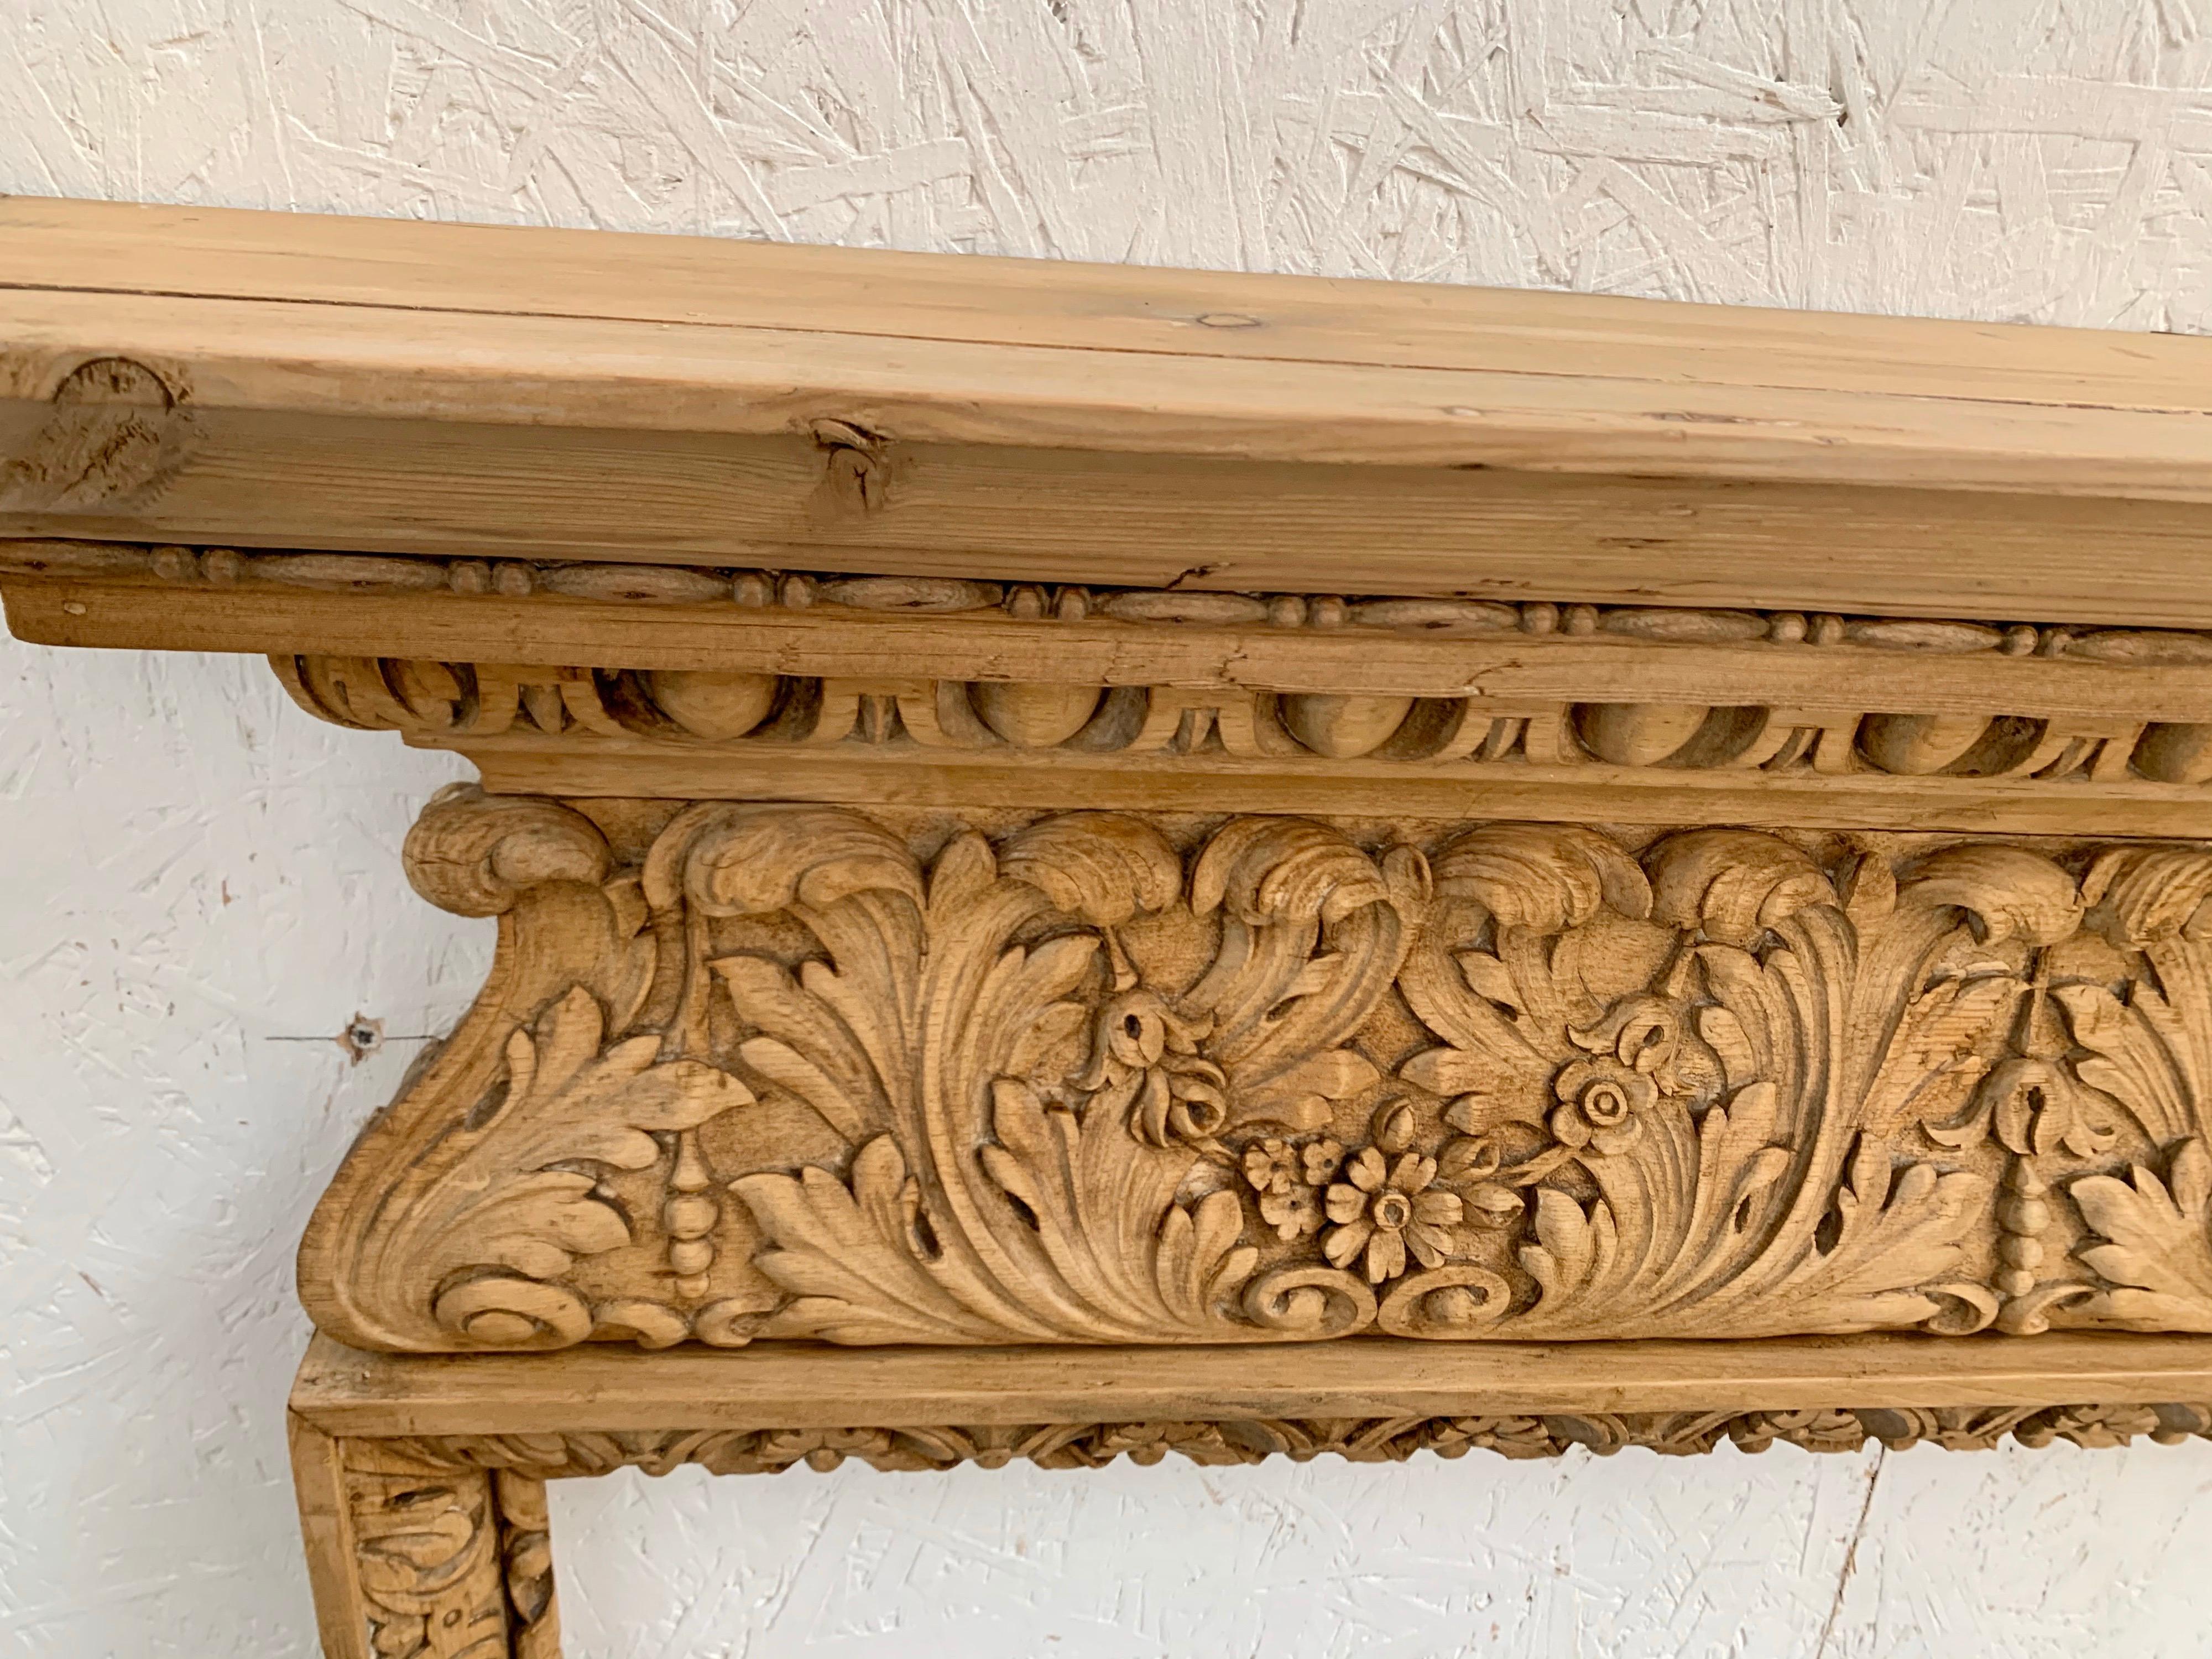 An exceptional elegant hand Georgian pine fireplace surround.
Recently salvaged from old English manor barn.
Very fine detailed legs and wildly carved frieze depicting delicate foliage, egg and dart mouldings and acanthus leaf carvings.
A truly